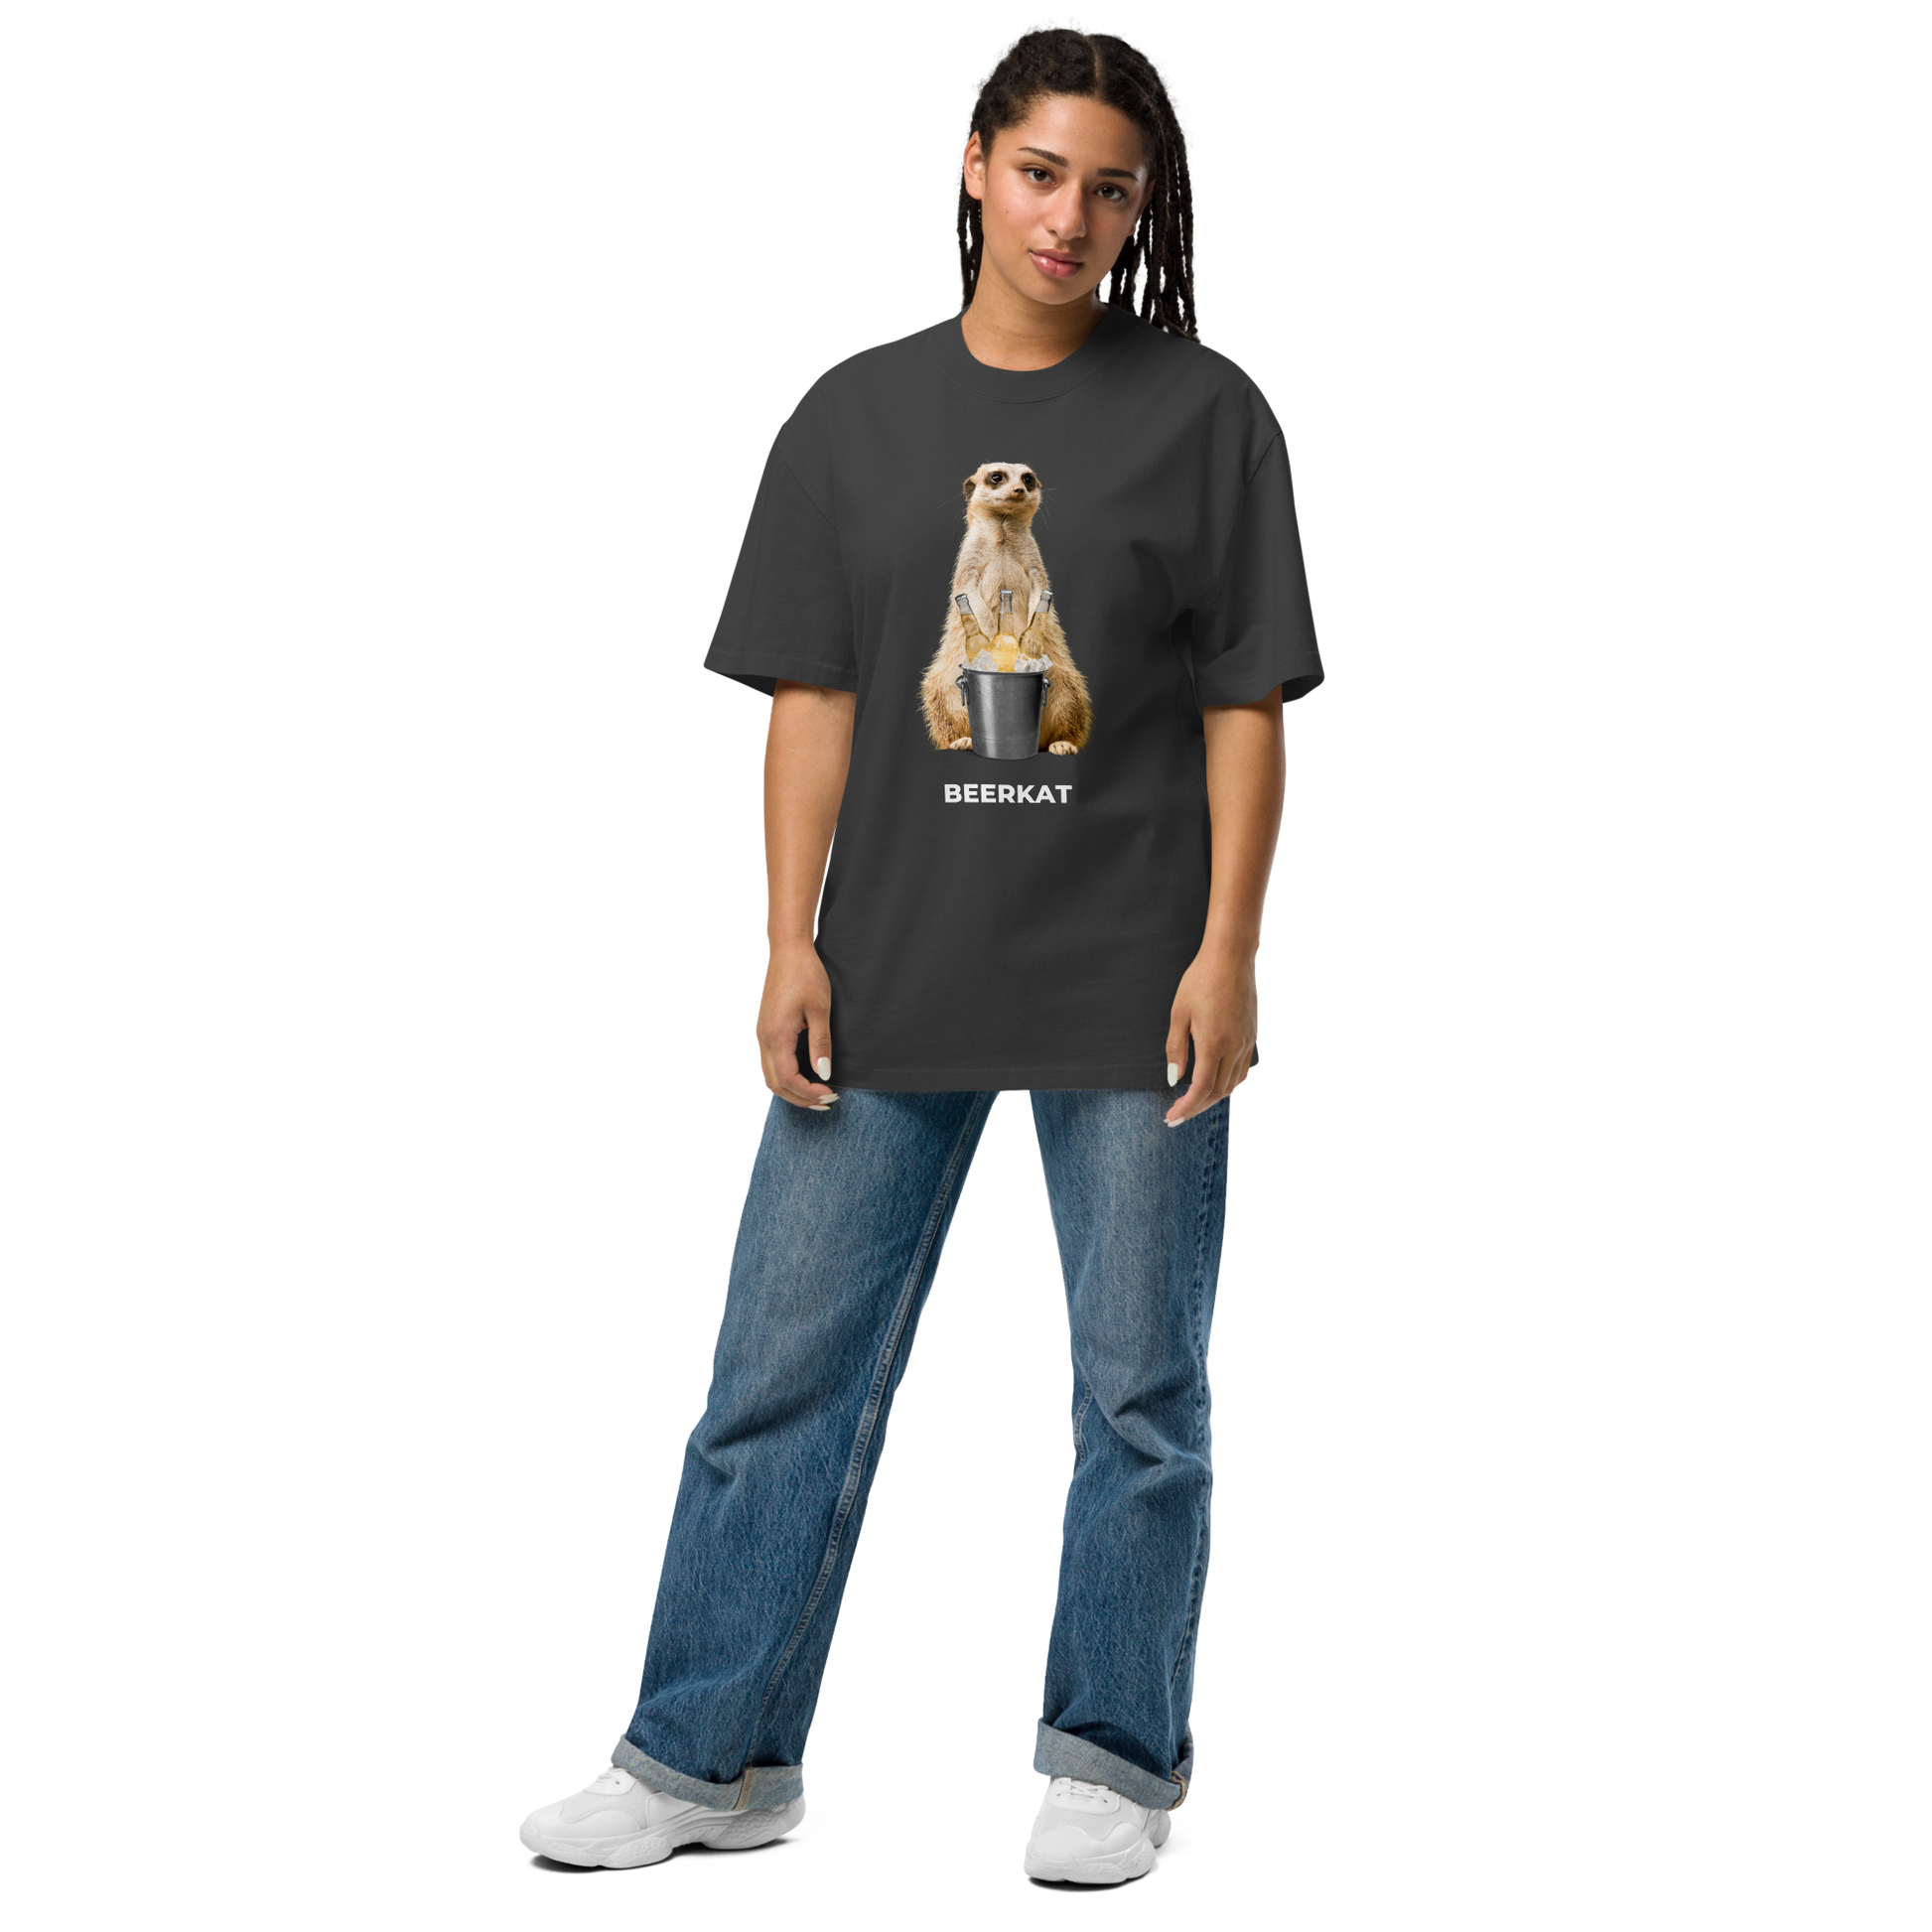 Woman wearing a Faded Black Meerkat Oversized T-Shirt featuring a hilarious Beerkat graphic on the chest - Funny Graphic Meerkat Oversized Tees - Boozy Fox